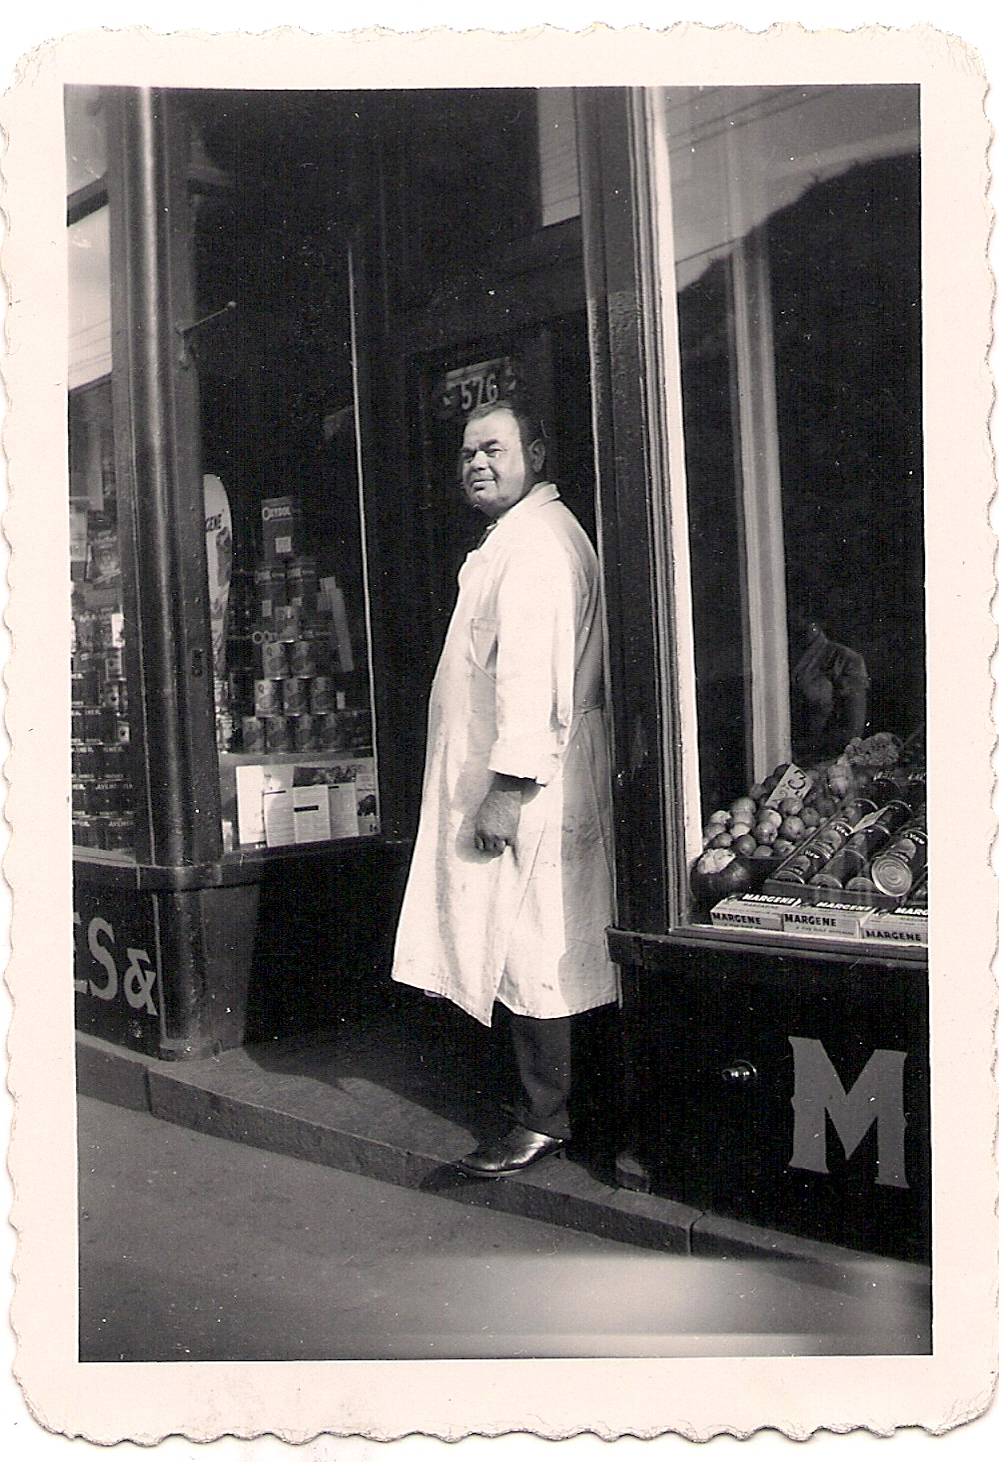 Man wearing long white coat standing at entrance to butcher shop - stack of canned goods in window.